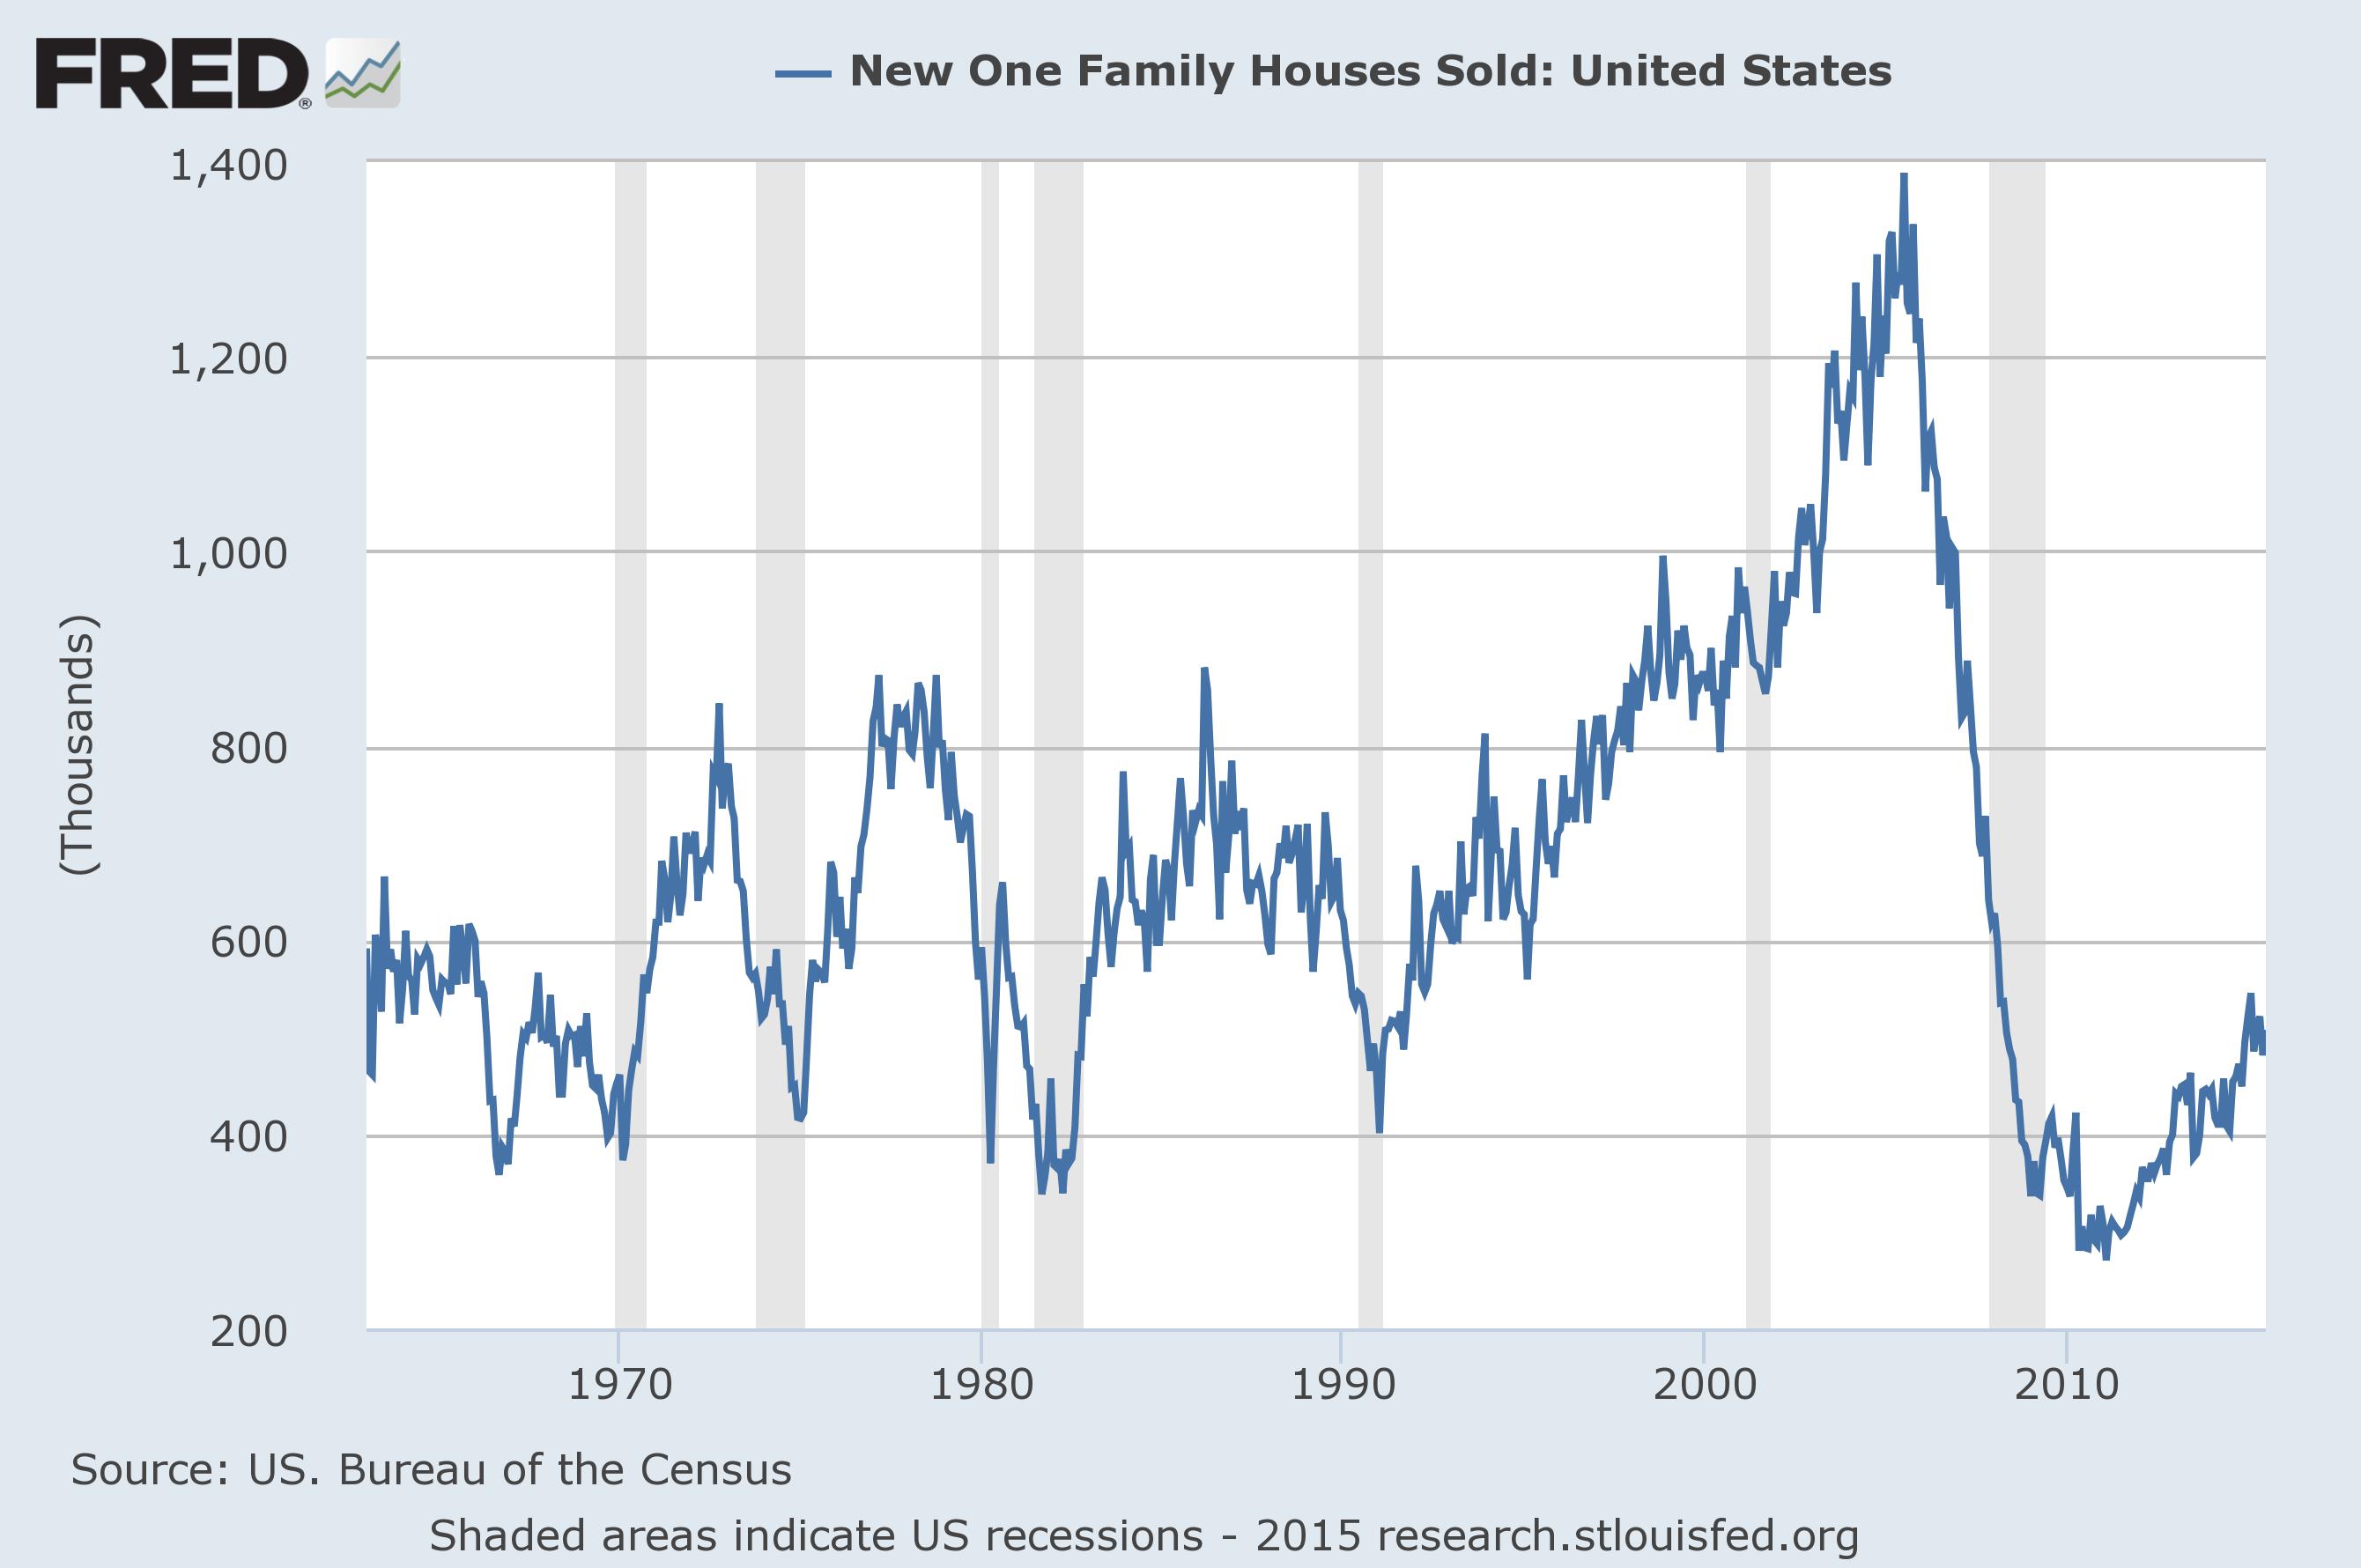 New One Family Houses Sold: US